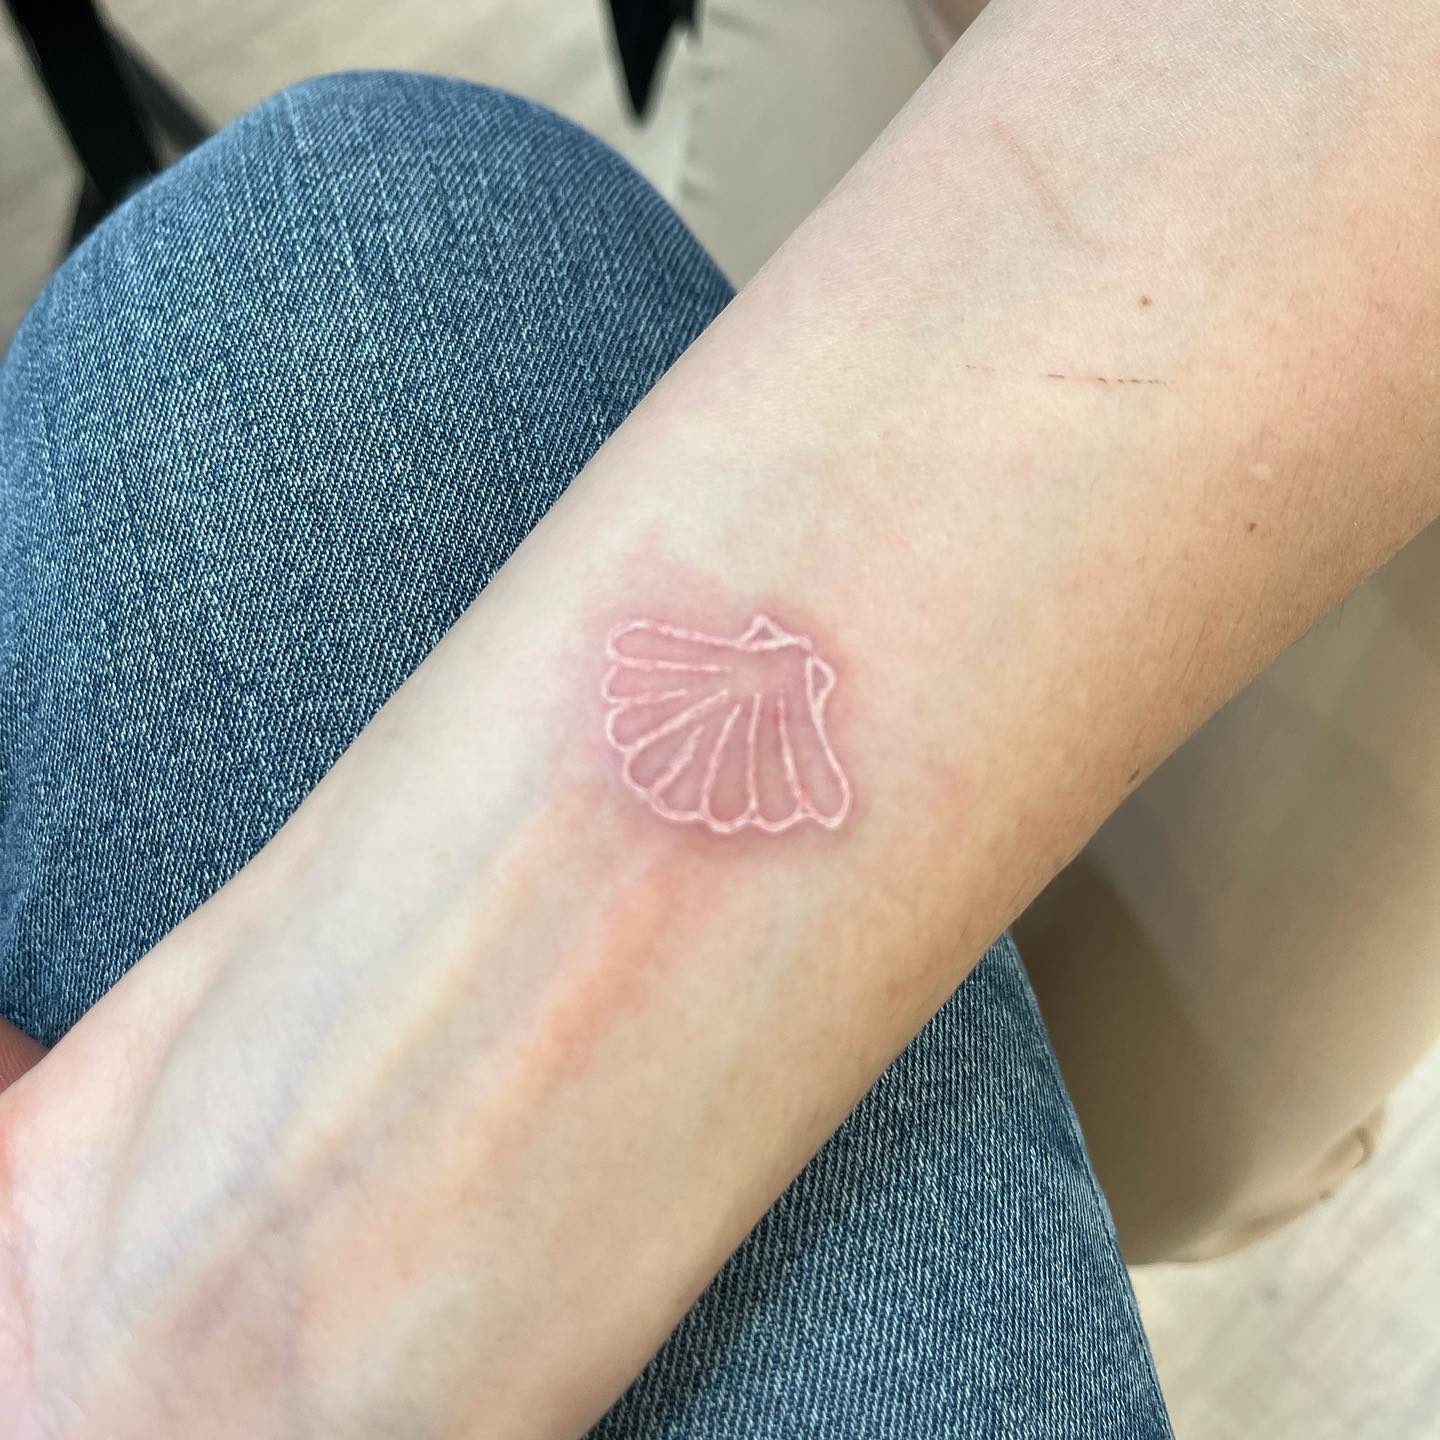 A white ink sea shell tattoo is a great way to show your love for the sea and all it has to offer. You can get the design inked on your body, in the shape of an actual shell, or you can have it done with just a few simple lines that mimic the shape of an actual shell, like the one above.